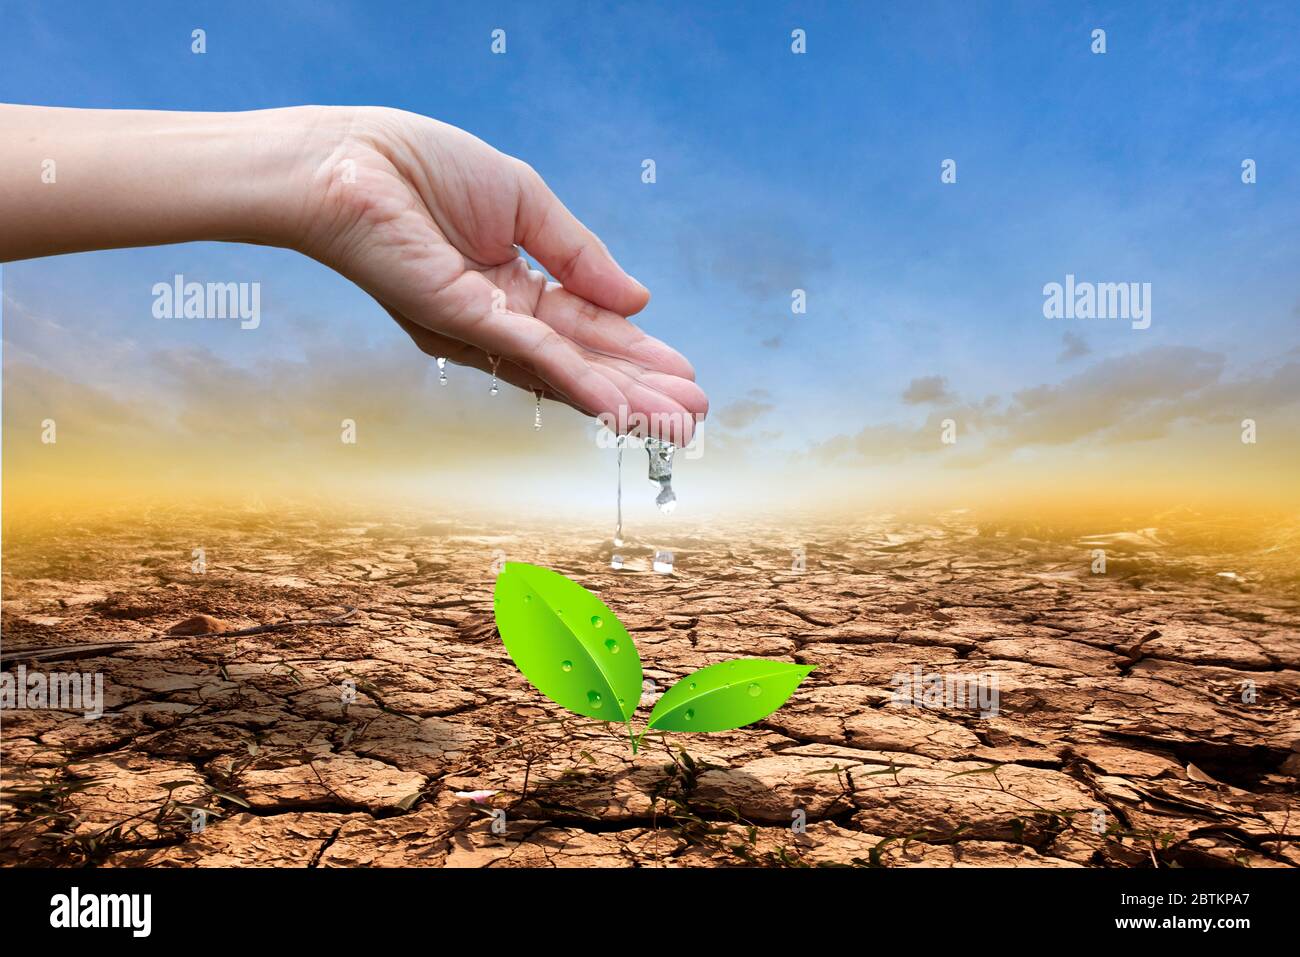 Close up hands watering a tree on cracked earth. Protect nature and environment. Stock Photo